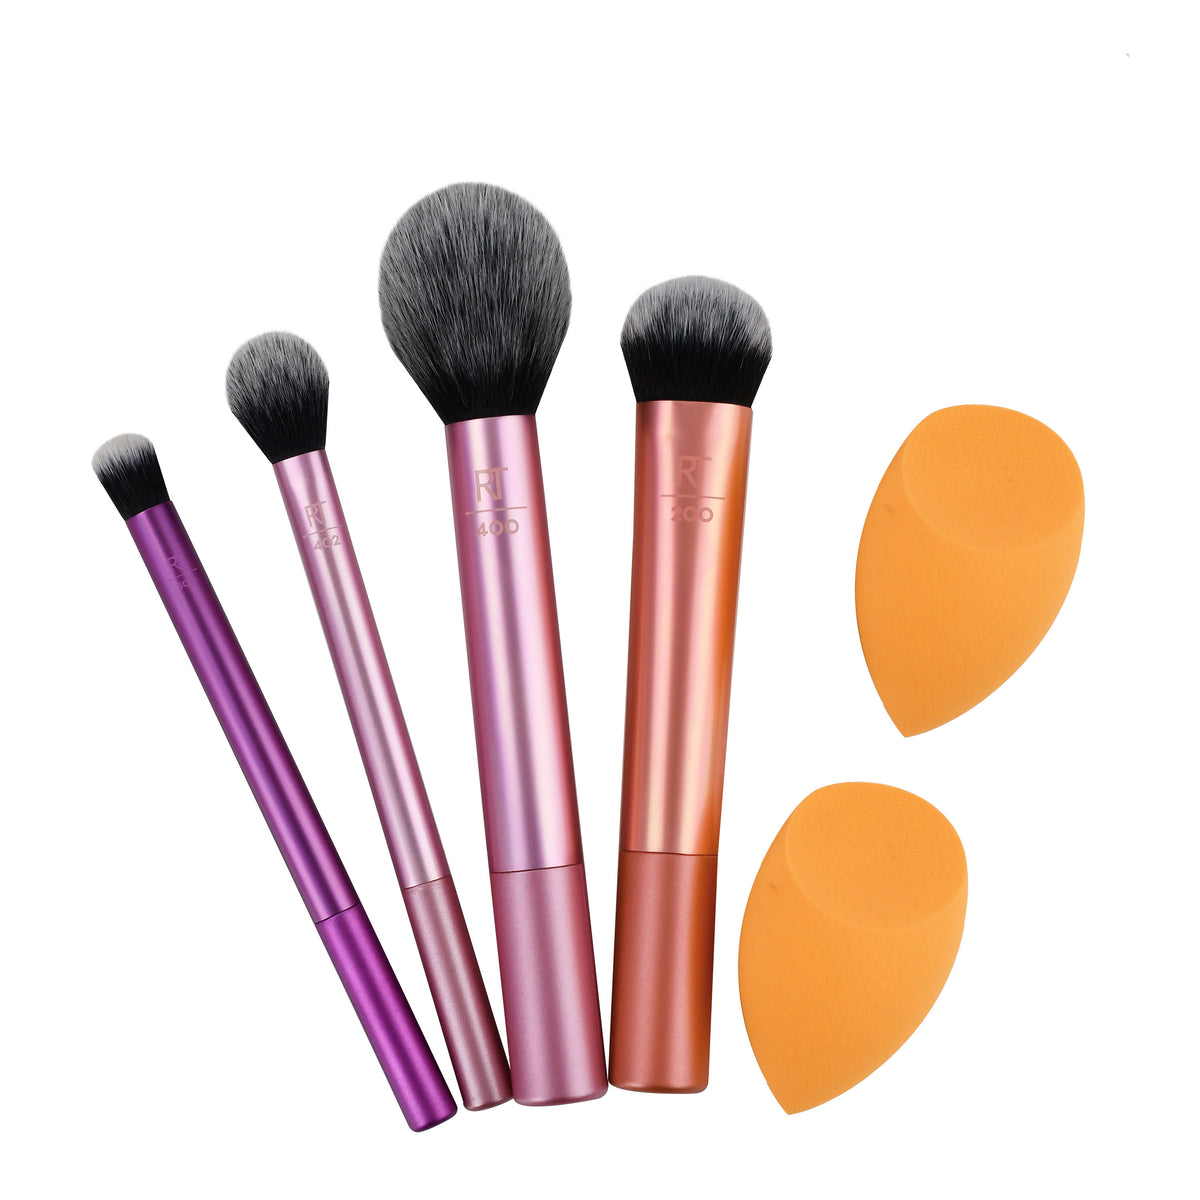 Real Techniques Makeup Brush with 2 Sponge for Eyeshadow, Foundation, Blush, and Concealer, 6 Piece Makeup Brush | RealTechniques .com